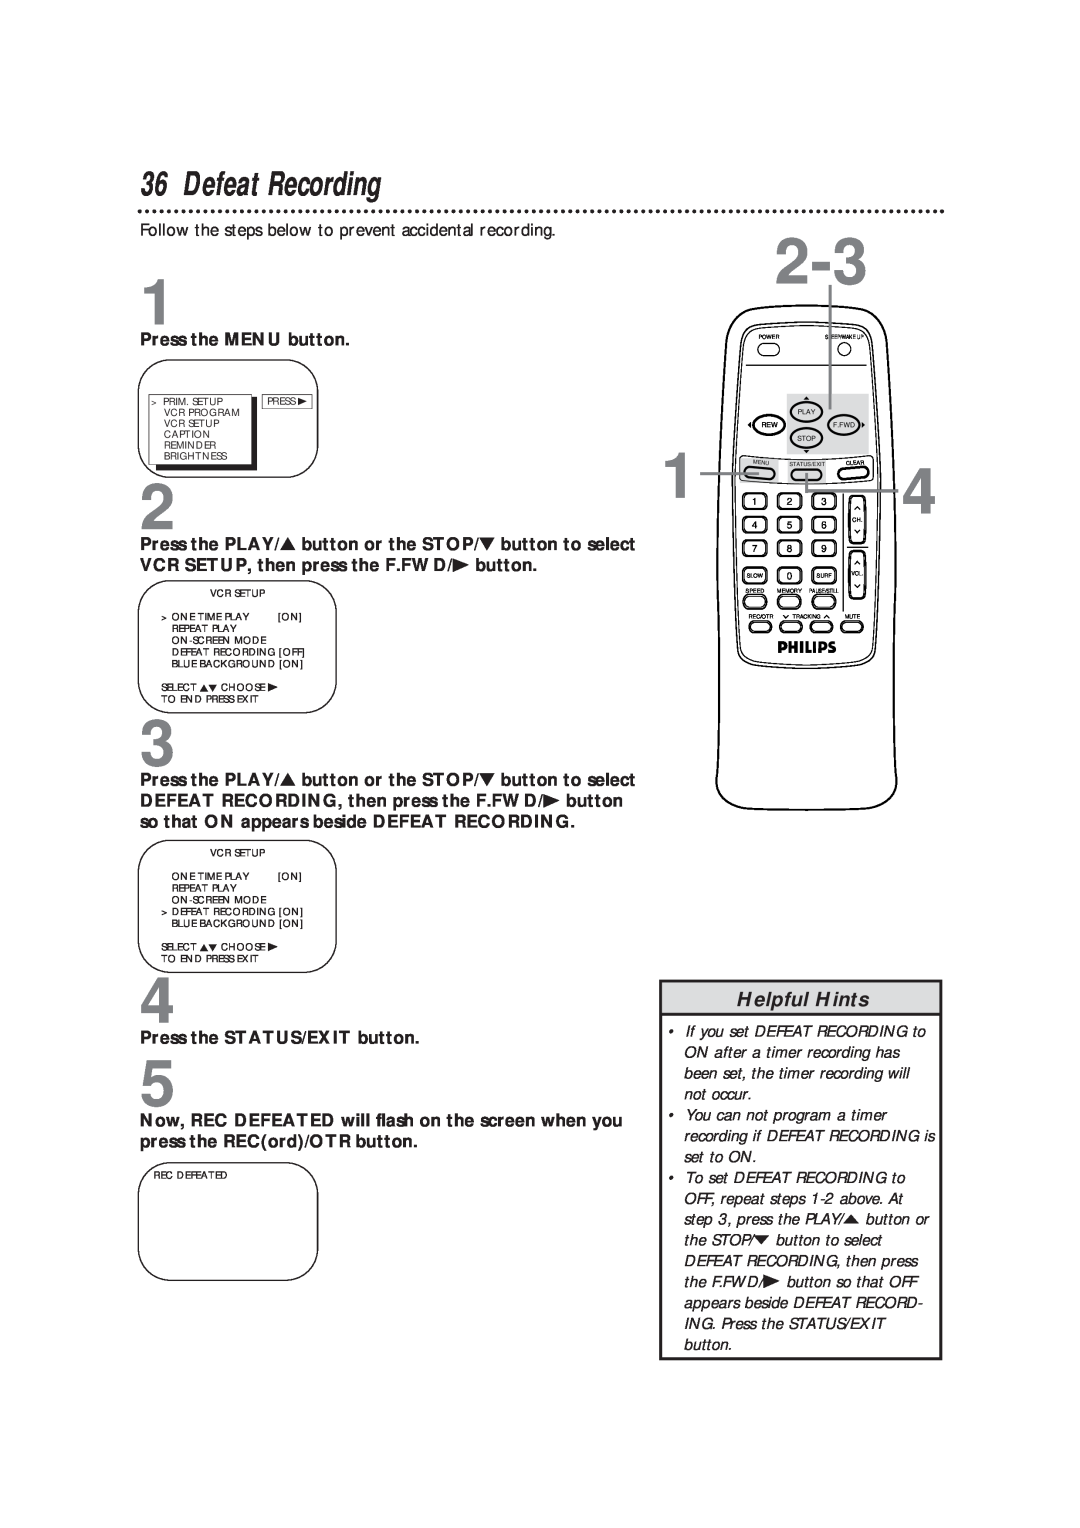 Magnavox CCB193AT owner manual Defeat Recording, Helpful Hints, Follow the steps below to prevent accidental recording 